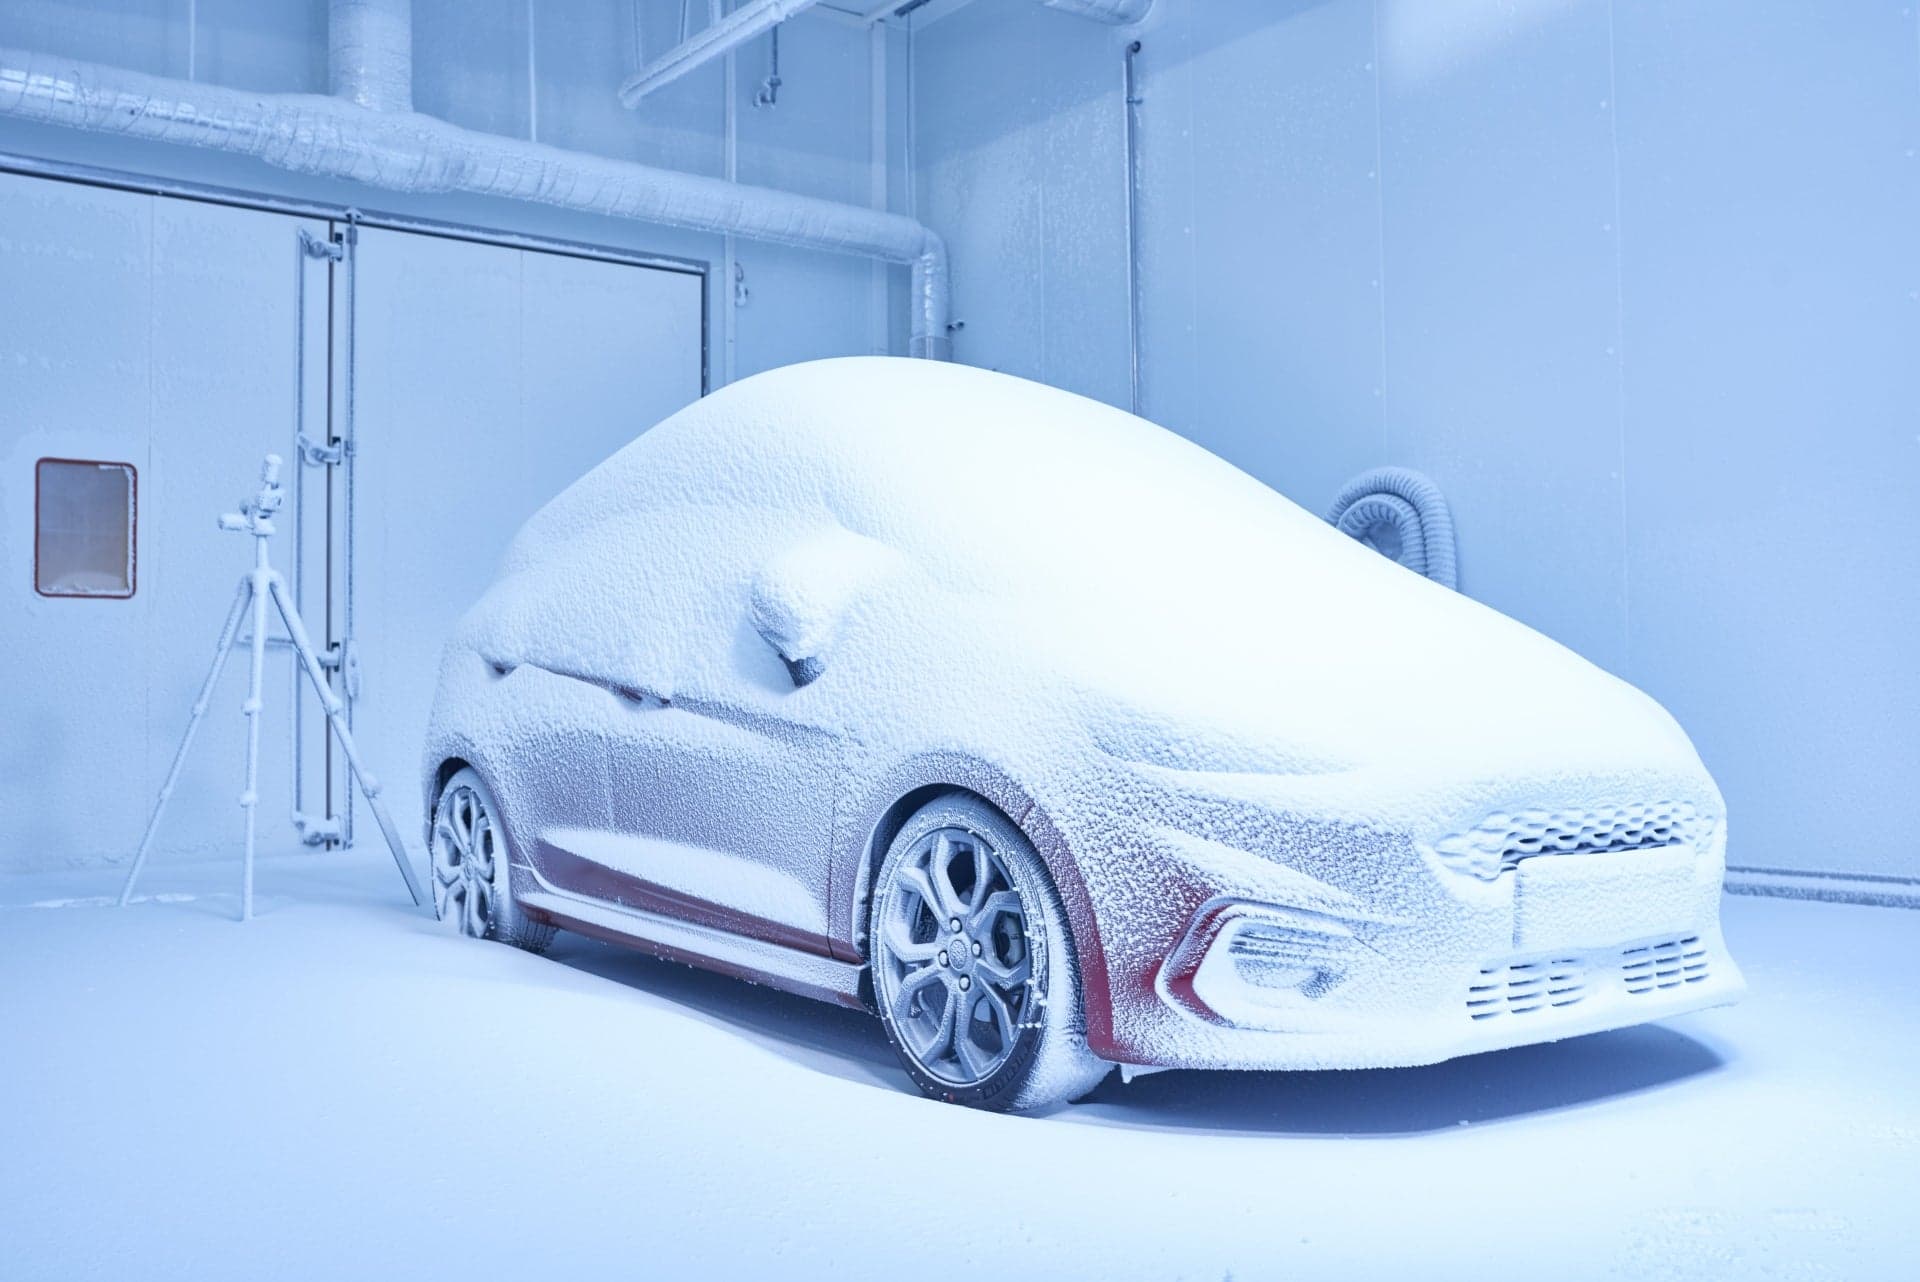 Ford Builds New Weather Factory Simulator to Punish Its Vehicles in Any Climate